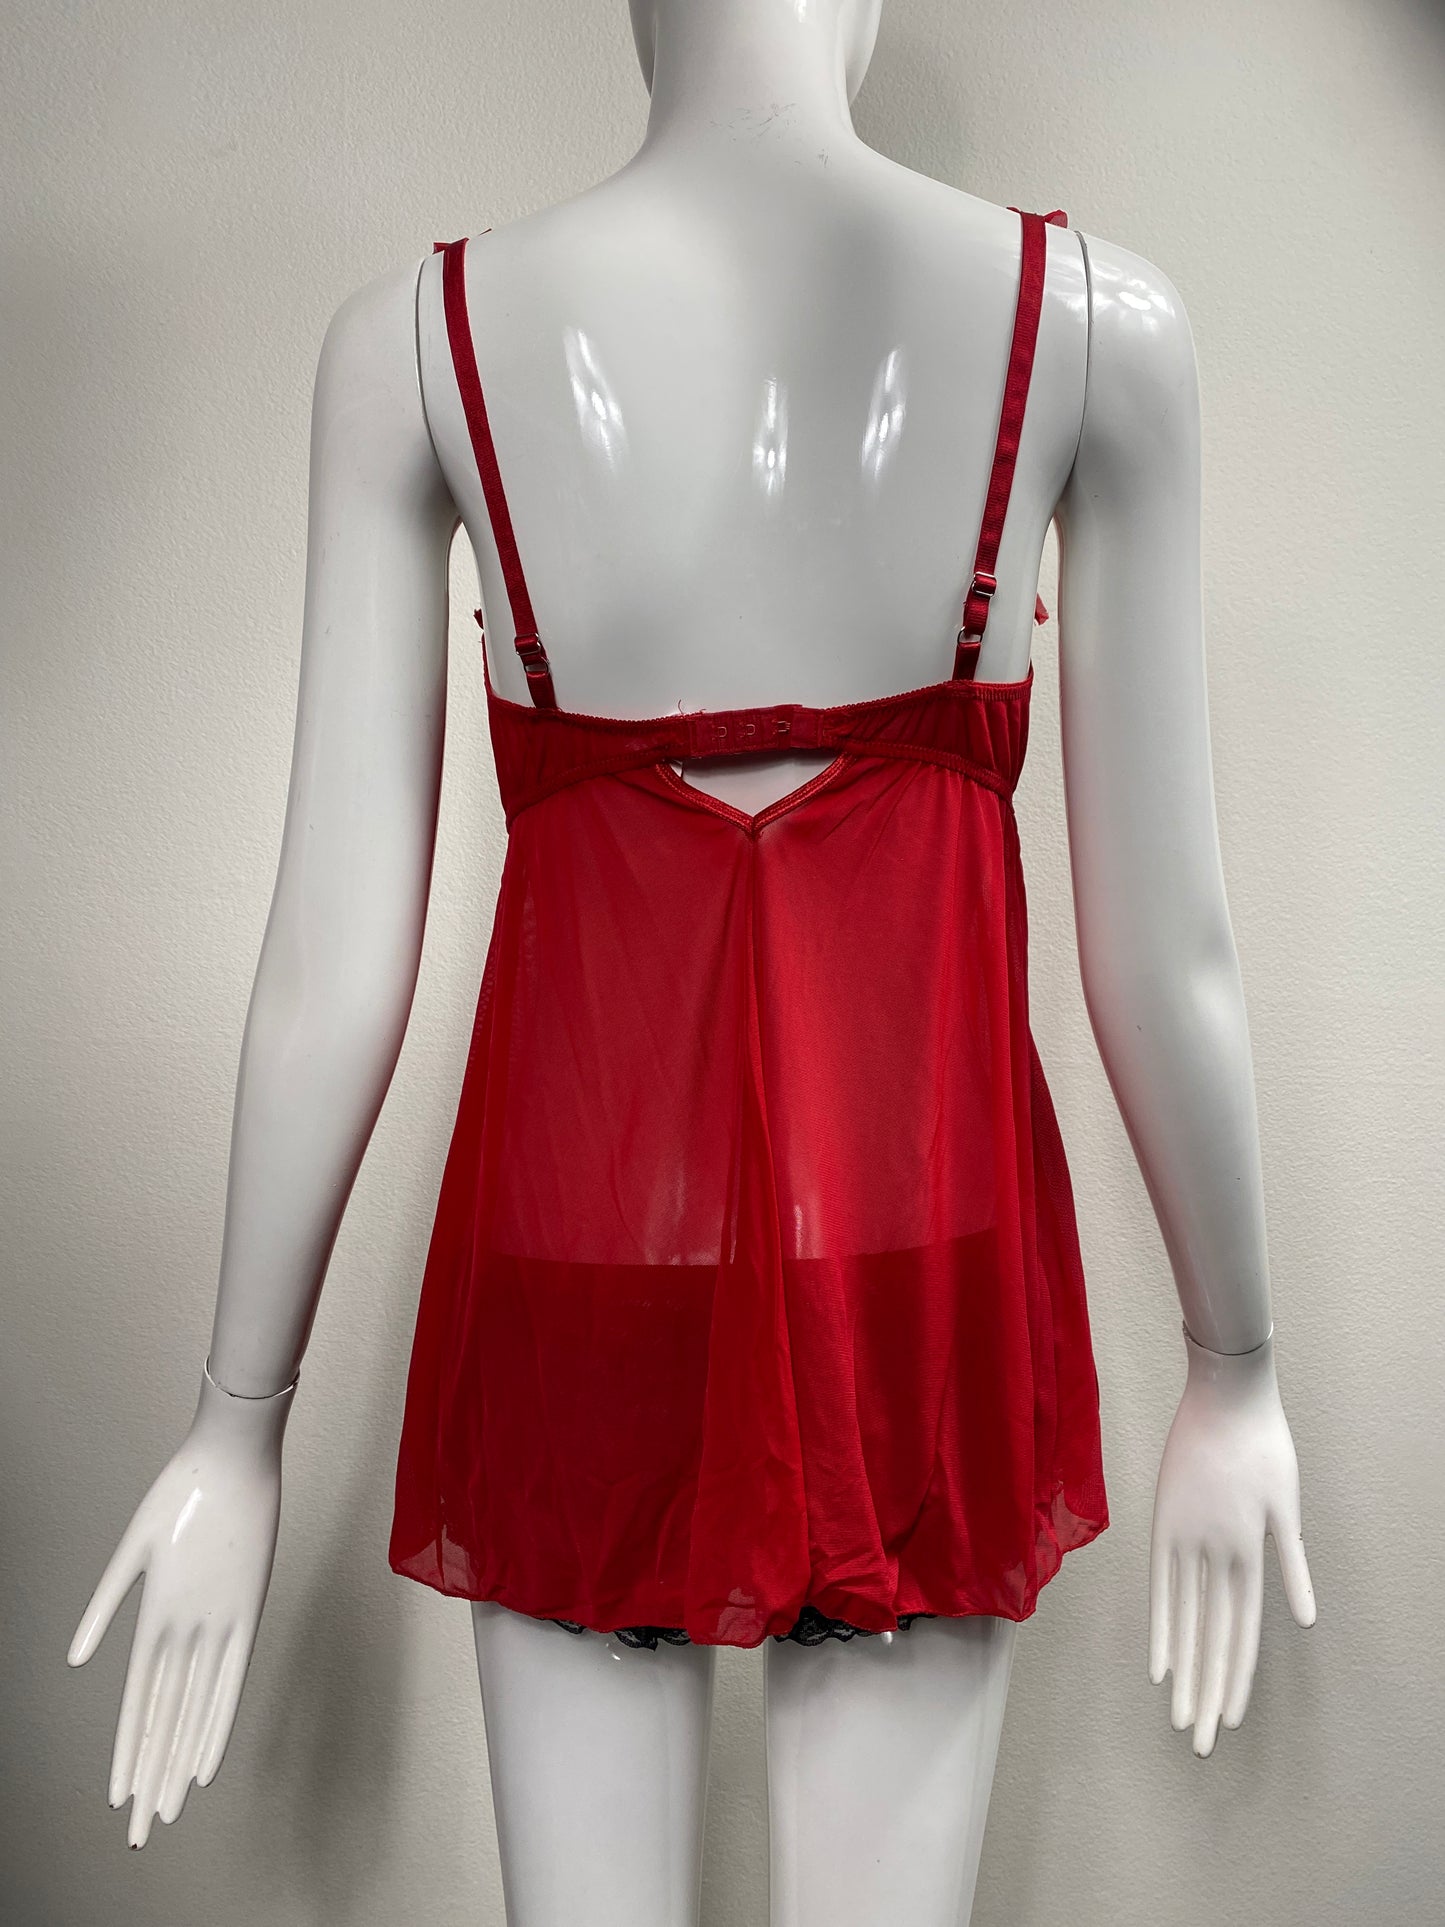 Frederick's Red Mesh Milkmaid Babydoll